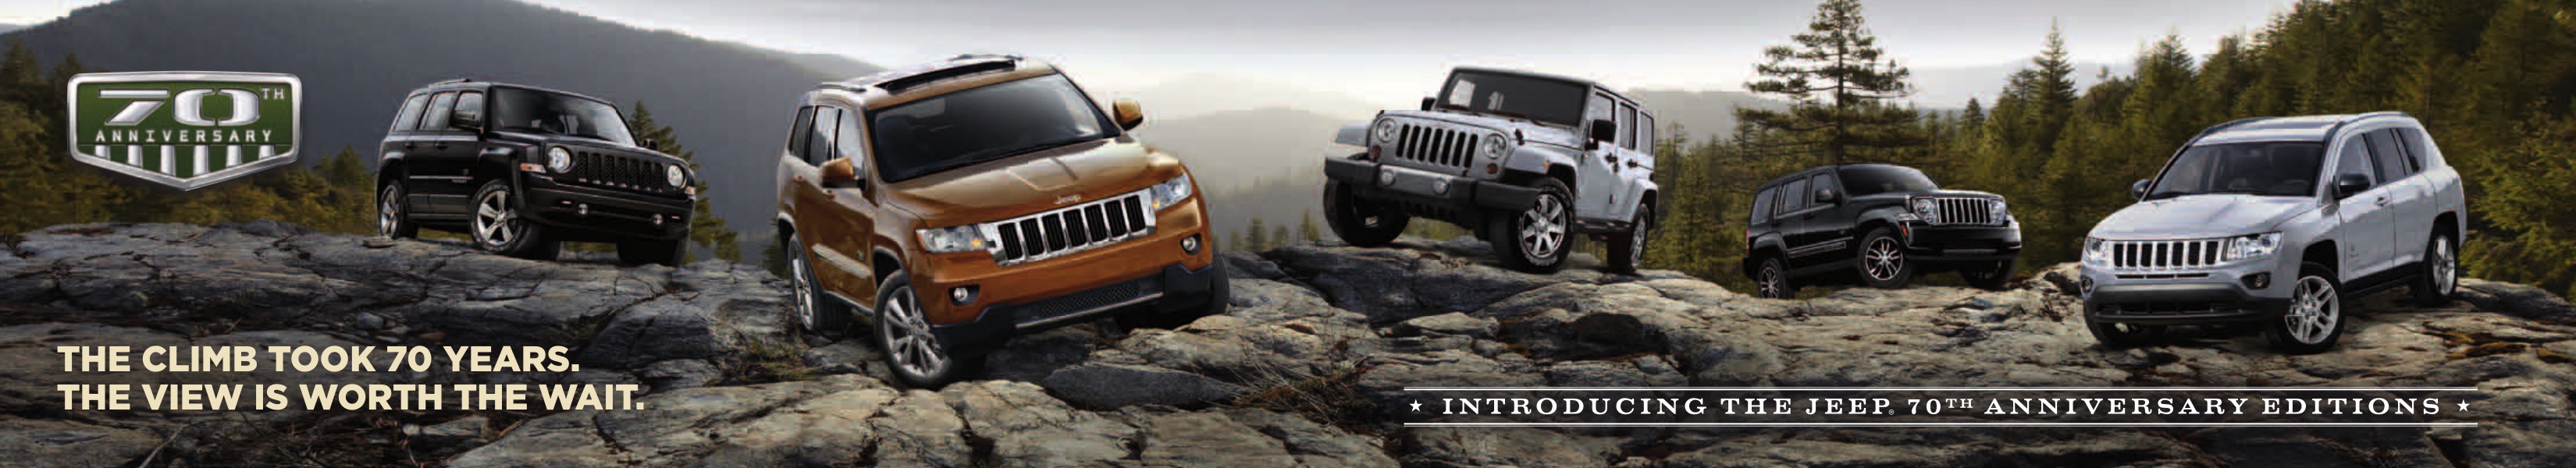 2011 Jeep Full Line Brochure Page 5